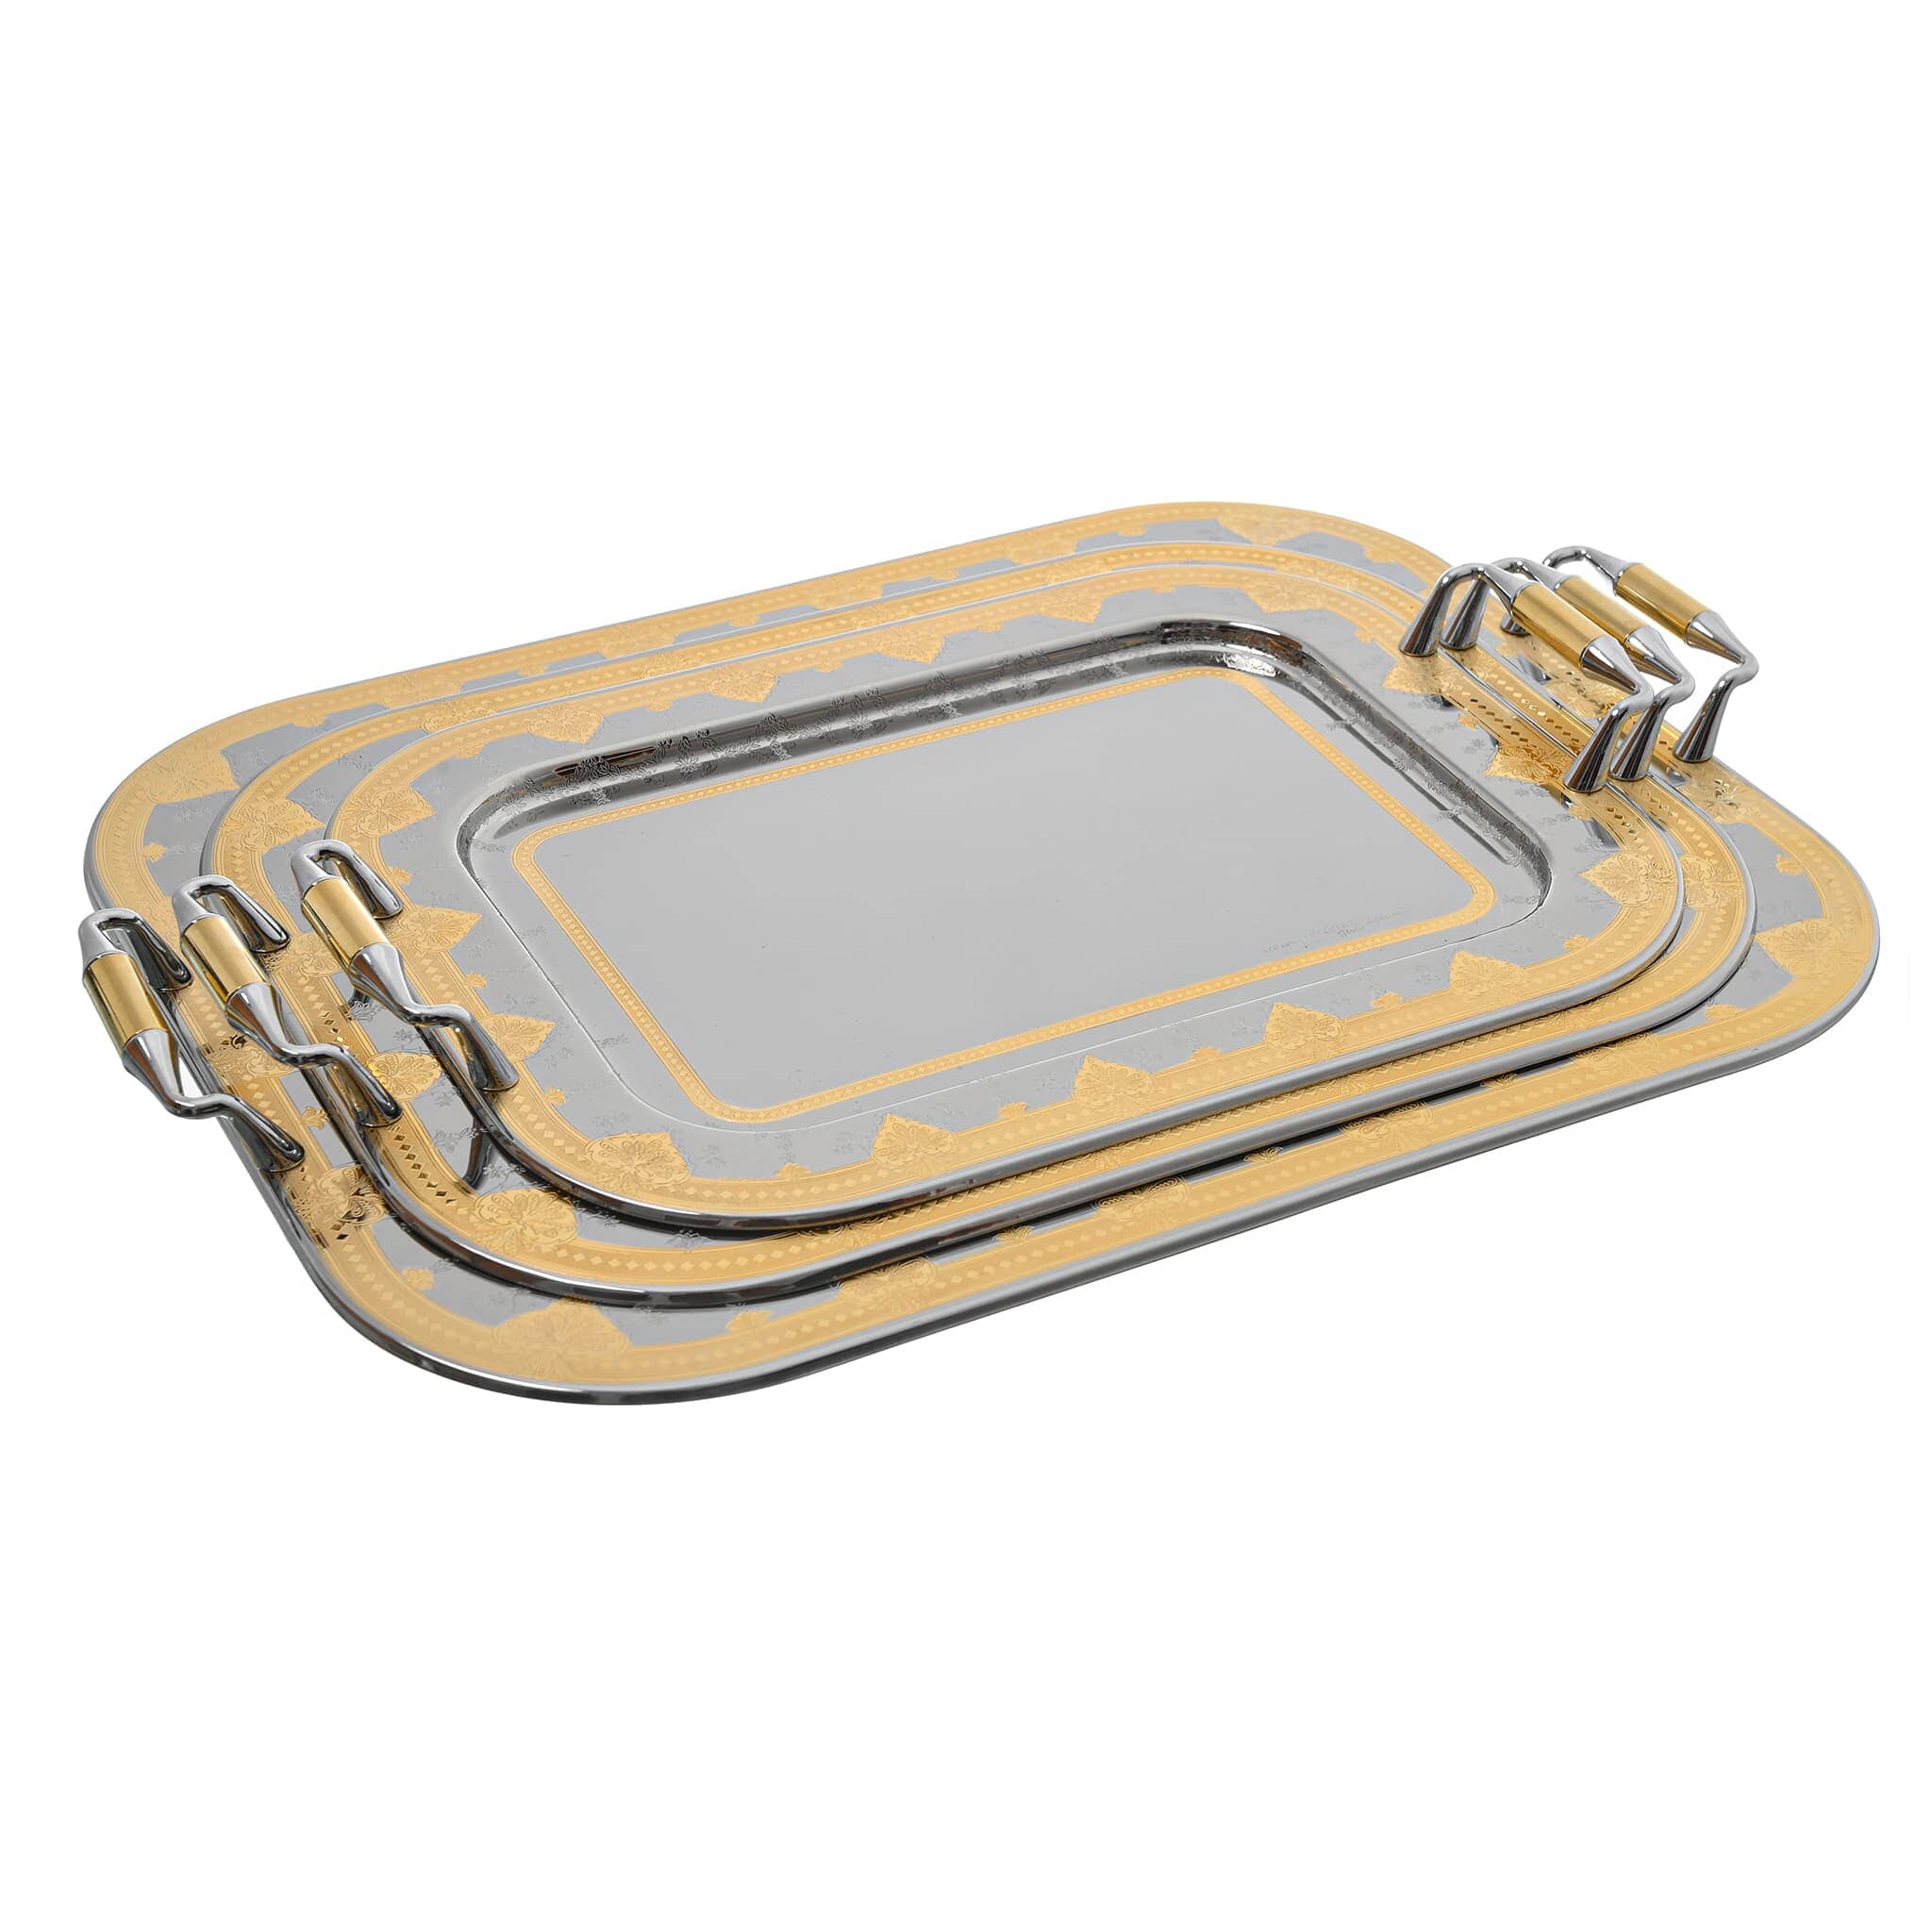 Elegant Gioiel - Rectangular Tray Set with Handles 3 Pieces - Gold - Stainless Steel 18/10 - 75000453